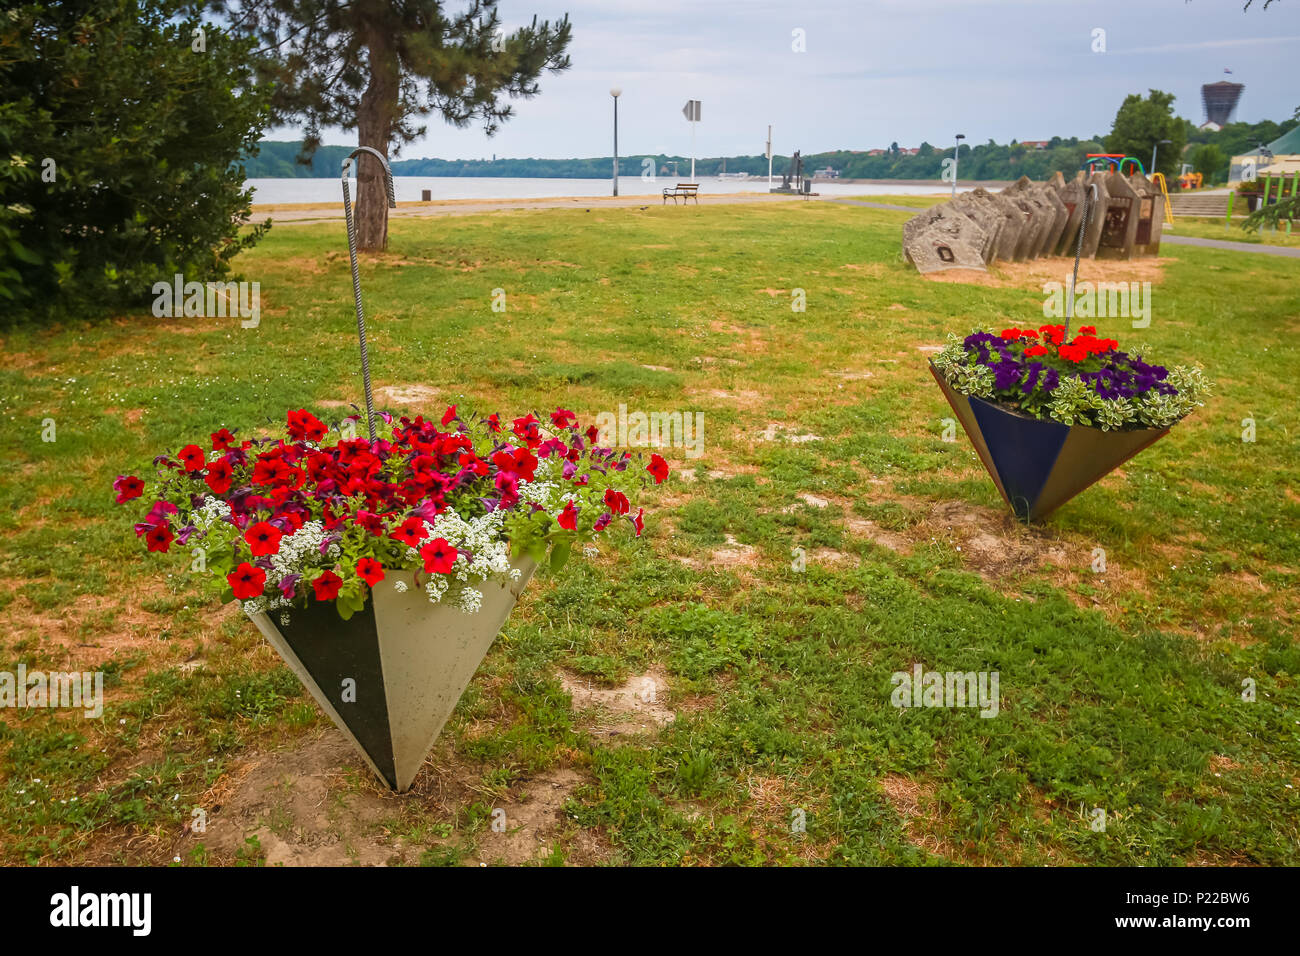 A view of flowers in umbrellas used as pots in a park on the coast of river Danube in Vukovar, Croatia. Stock Photo